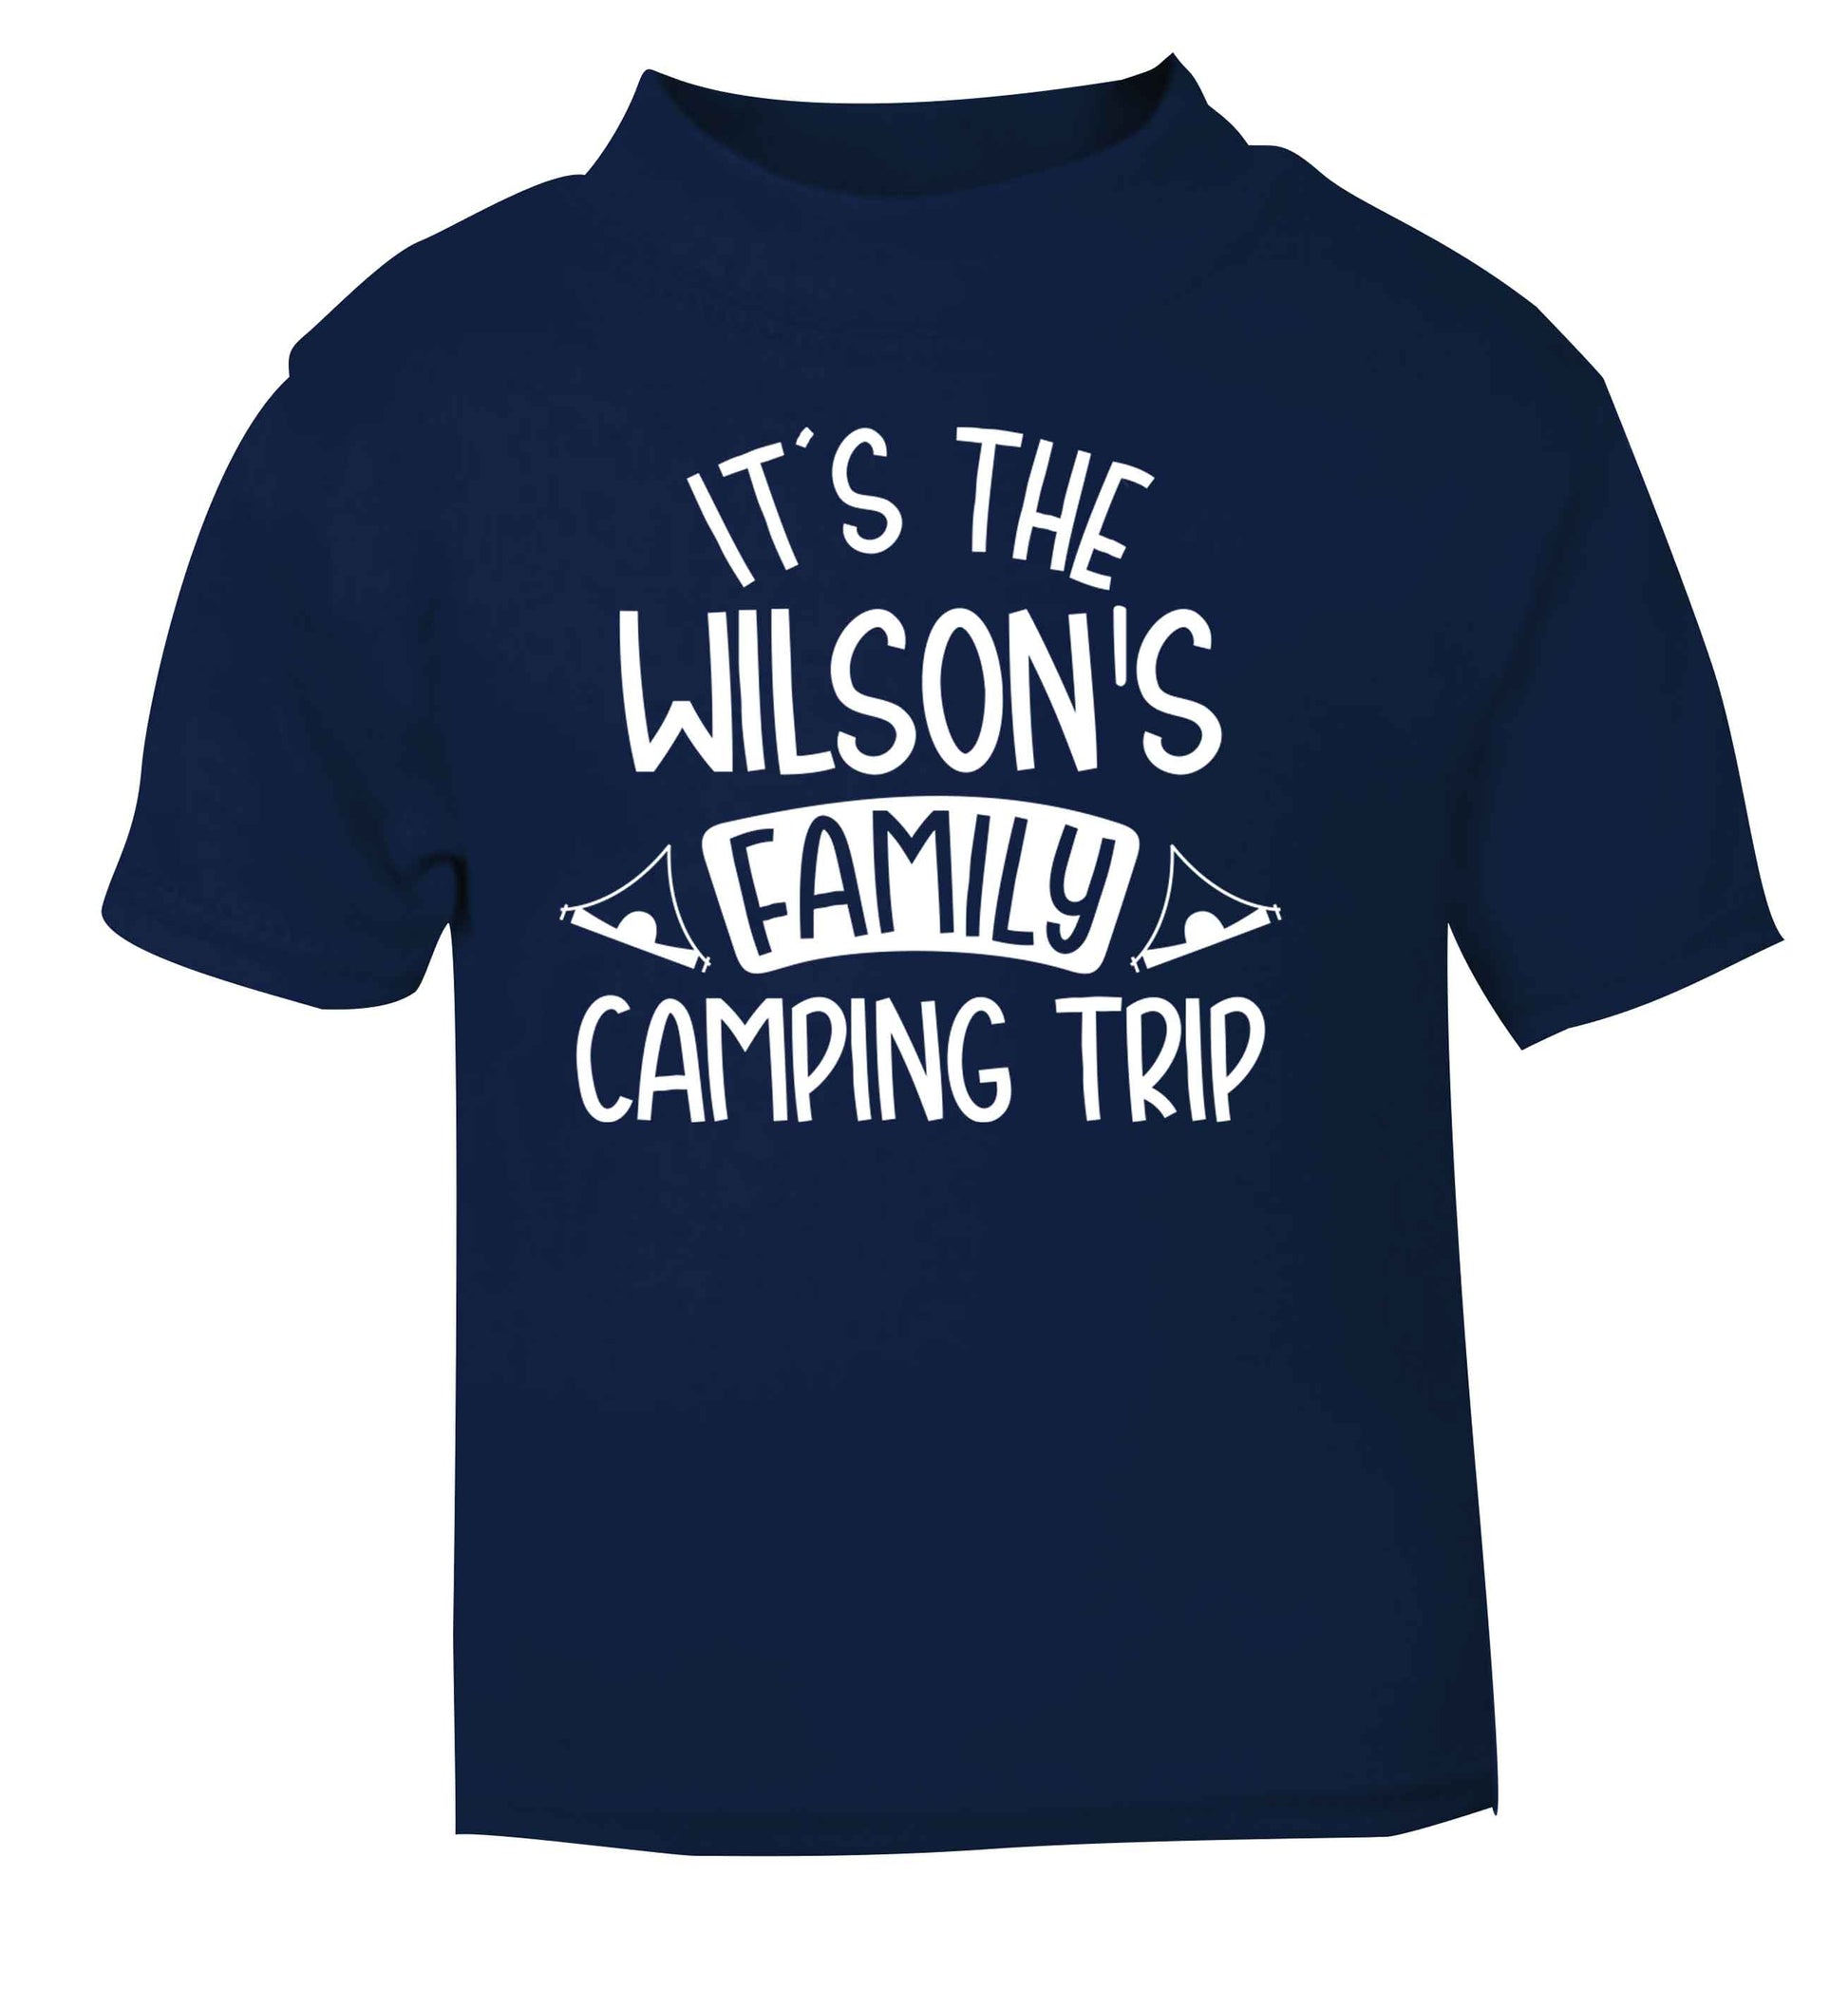 It's the Wilson's family camping trip personalised navy Baby Toddler Tshirt 2 Years